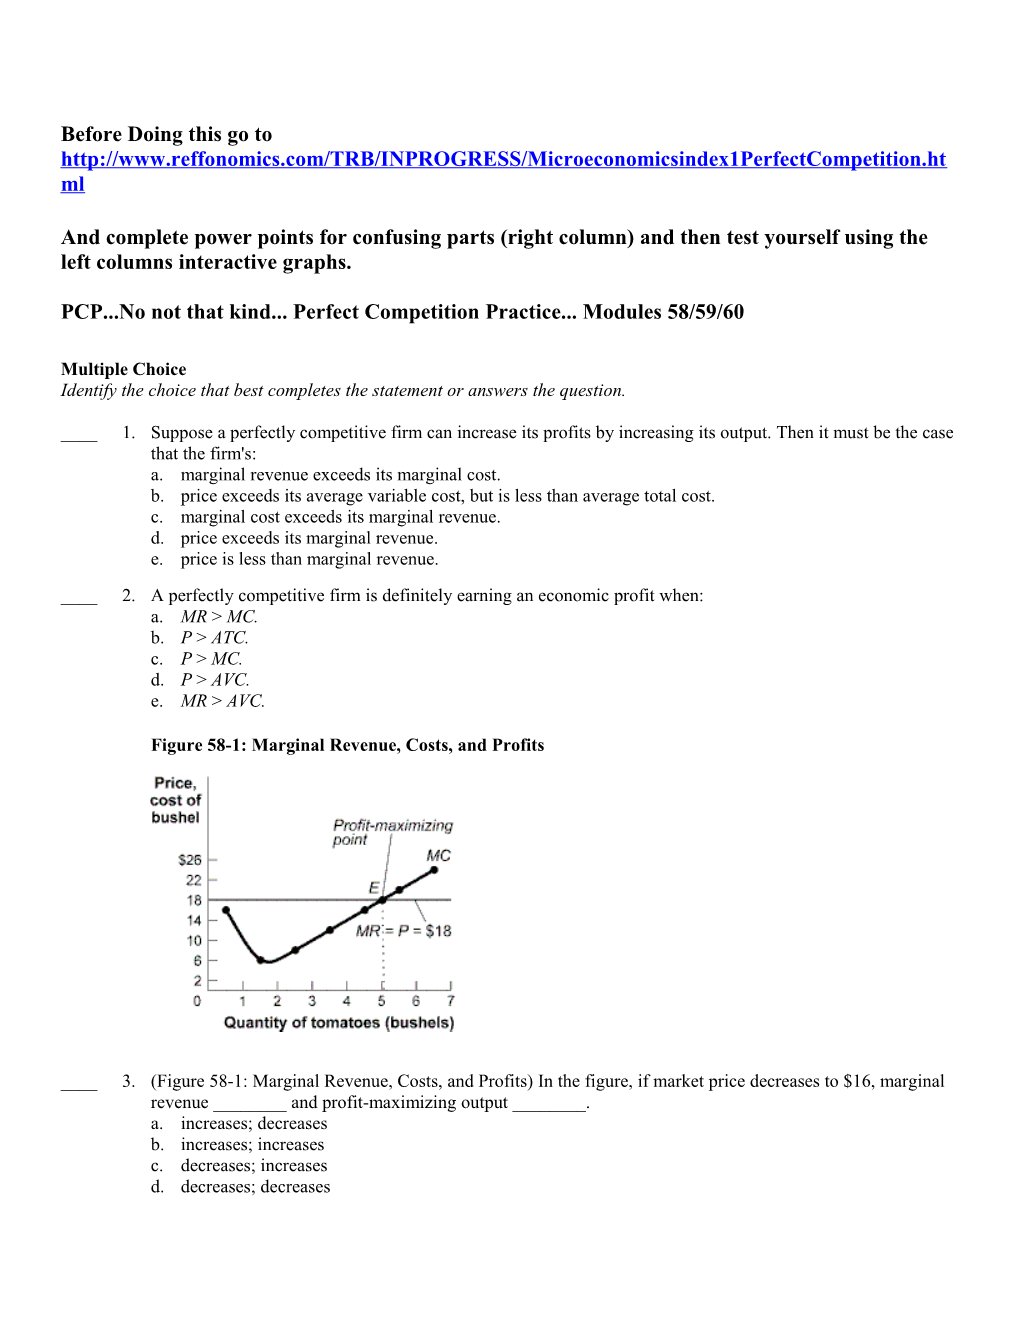 PCP No Not That Kind Perfect Competition Practice Modules 58/59/60